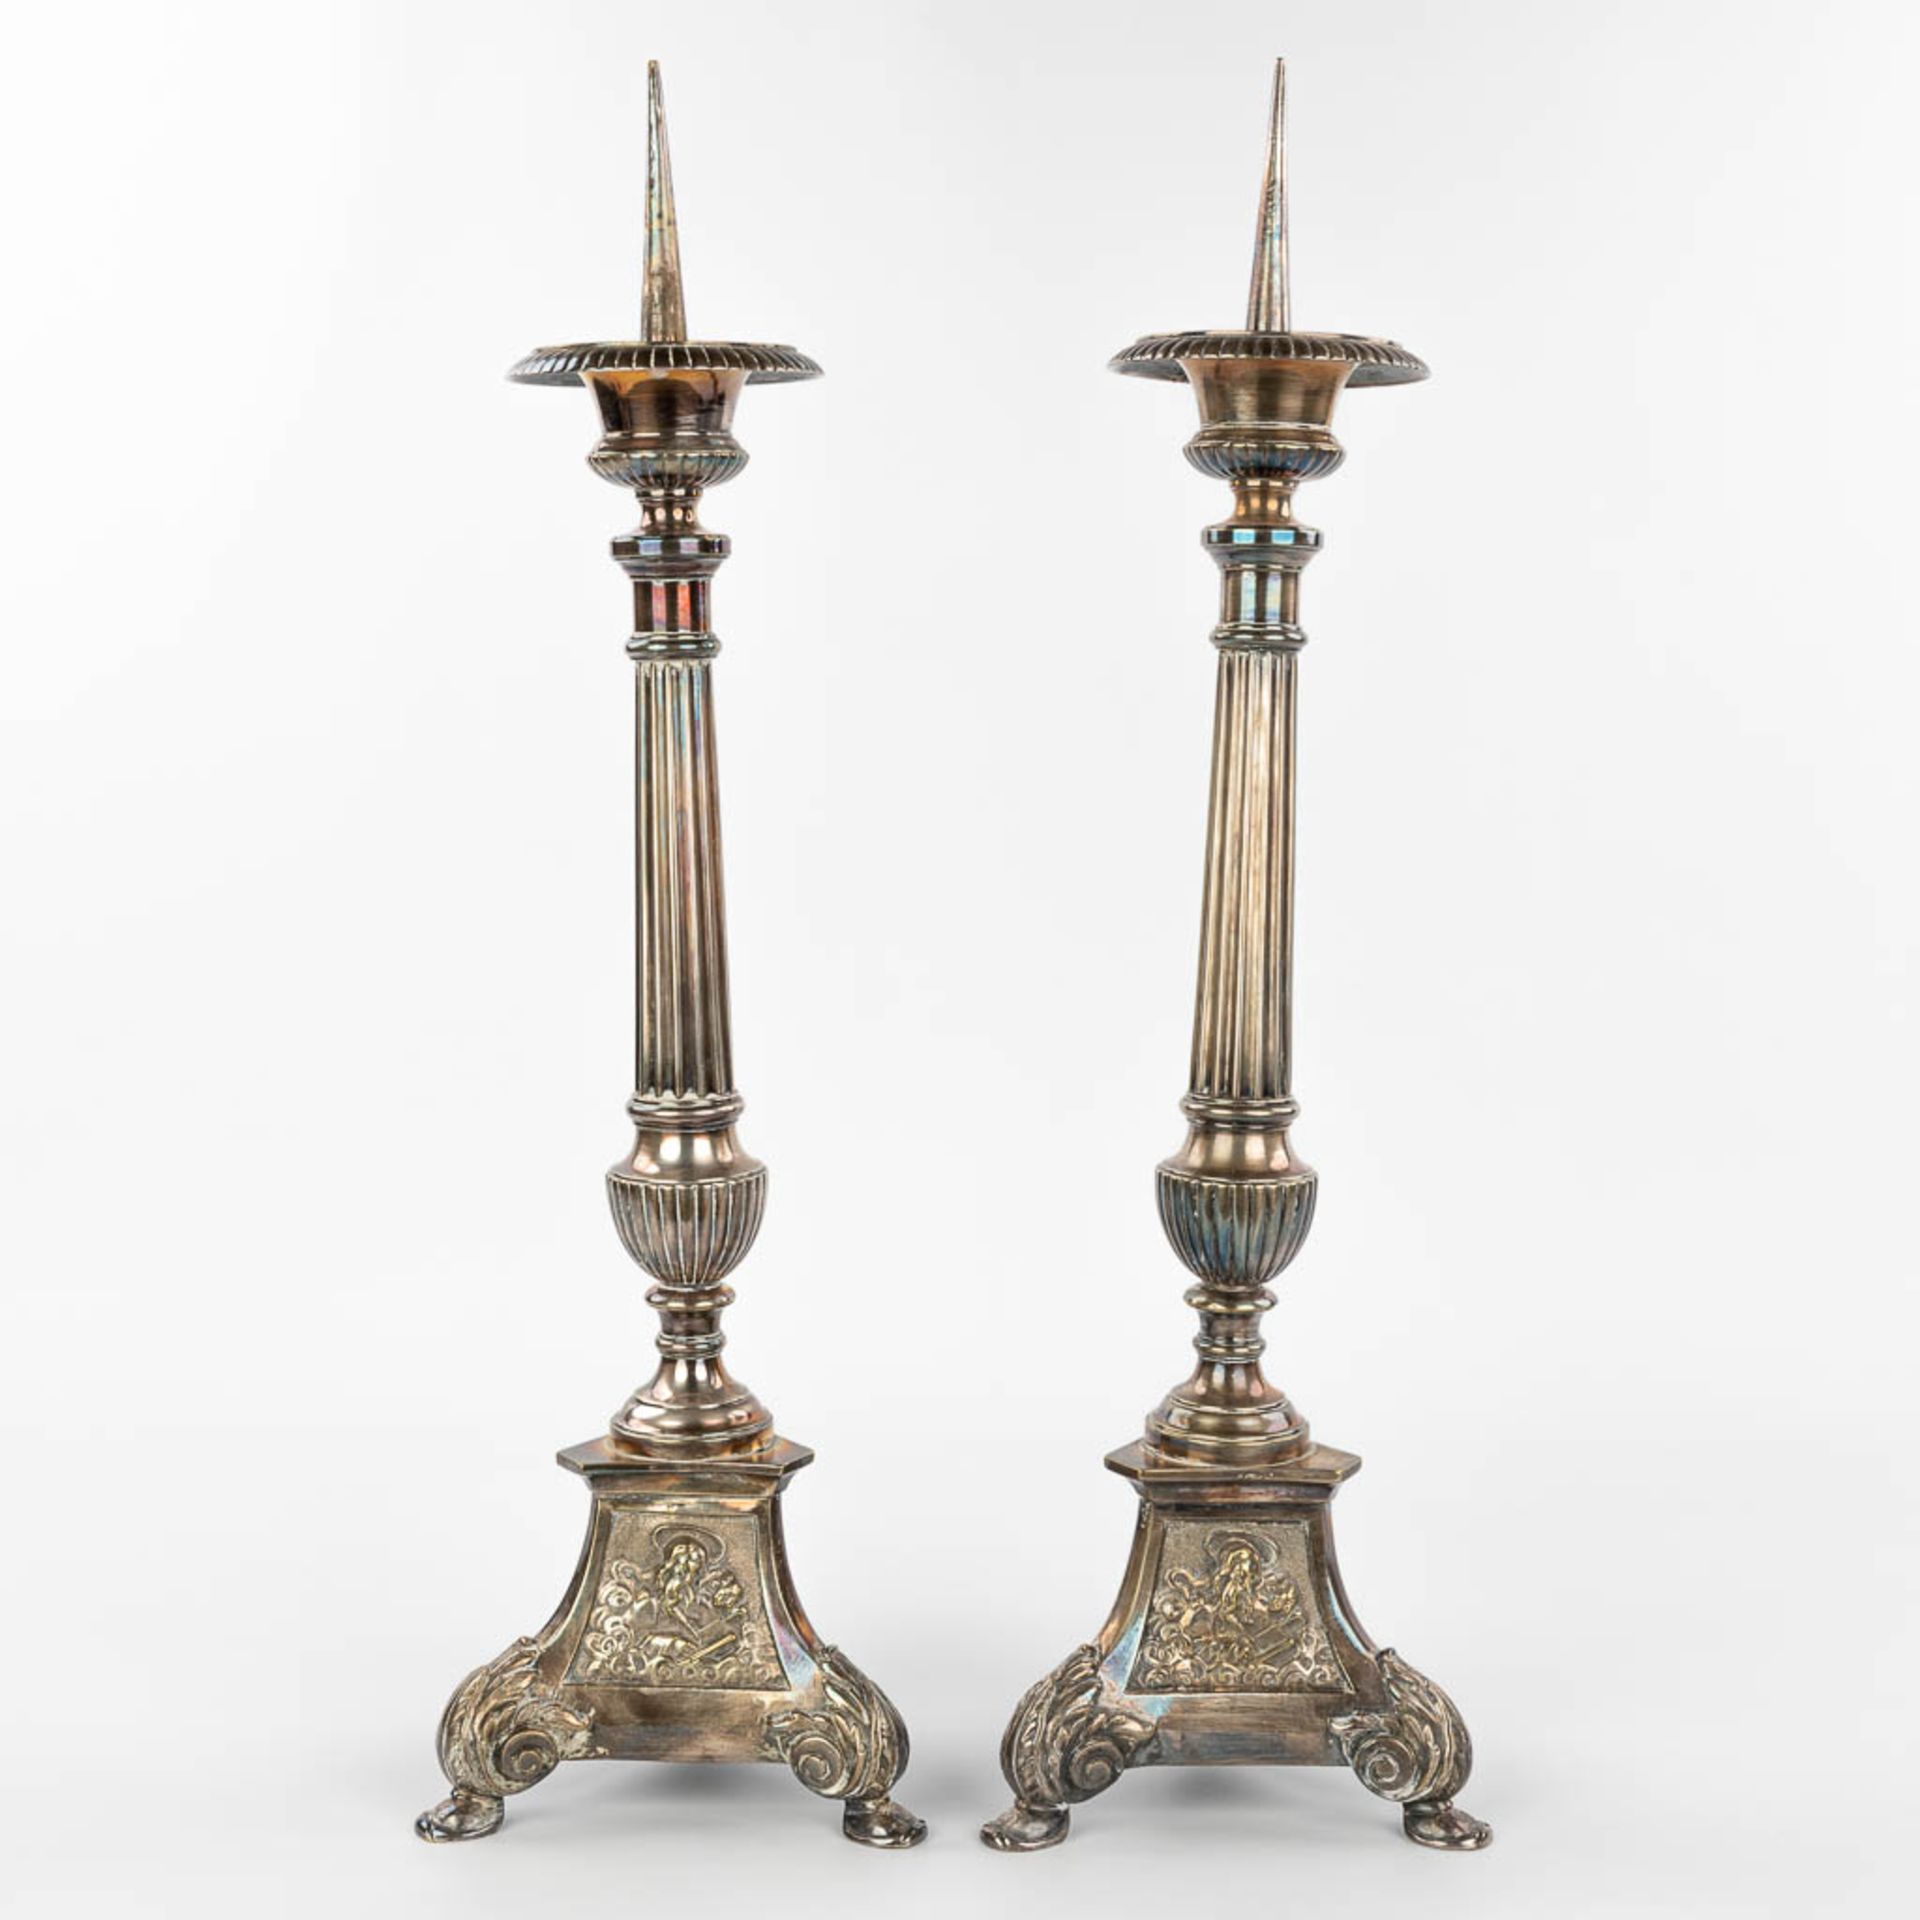 A pair of silver-plated candlesticks decorated with images of holy figurines. (H:59cm) - Image 9 of 11